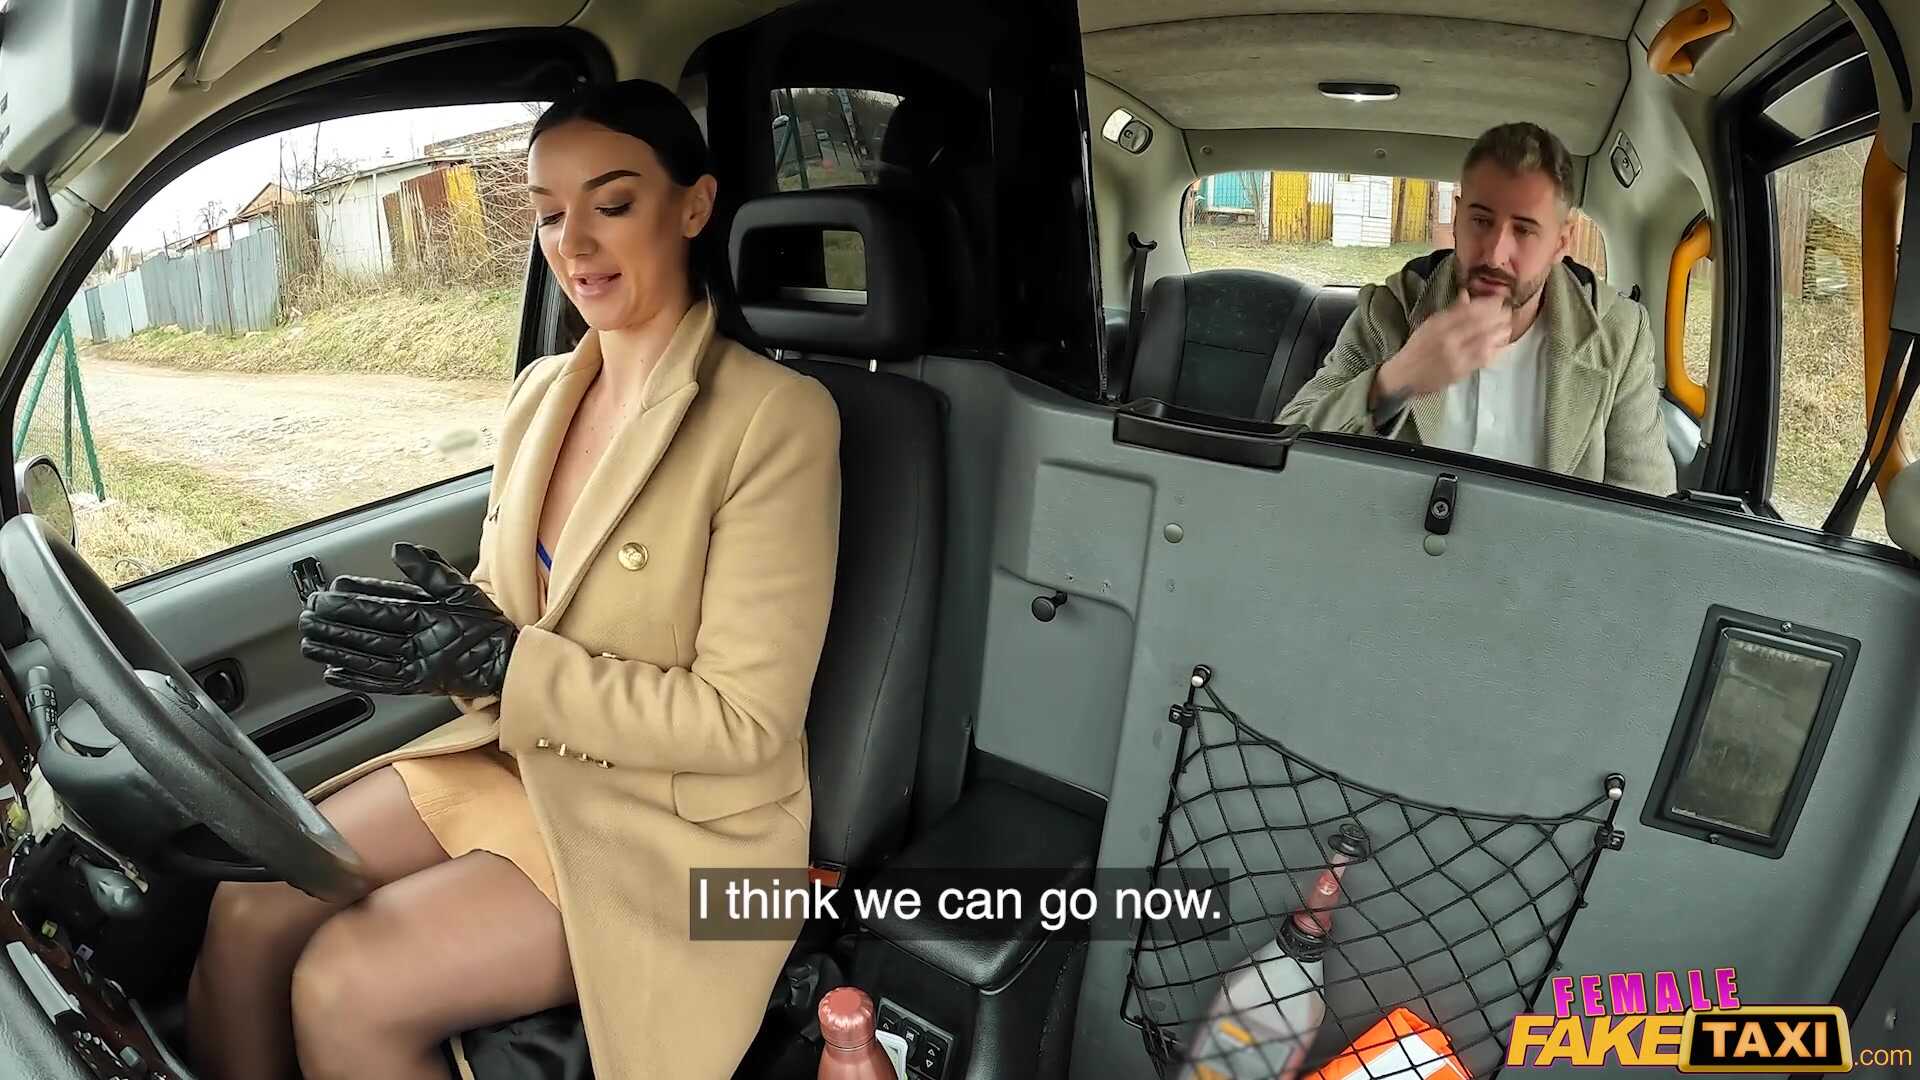 Female Fake Taxi - Anal Sex from Passer-By